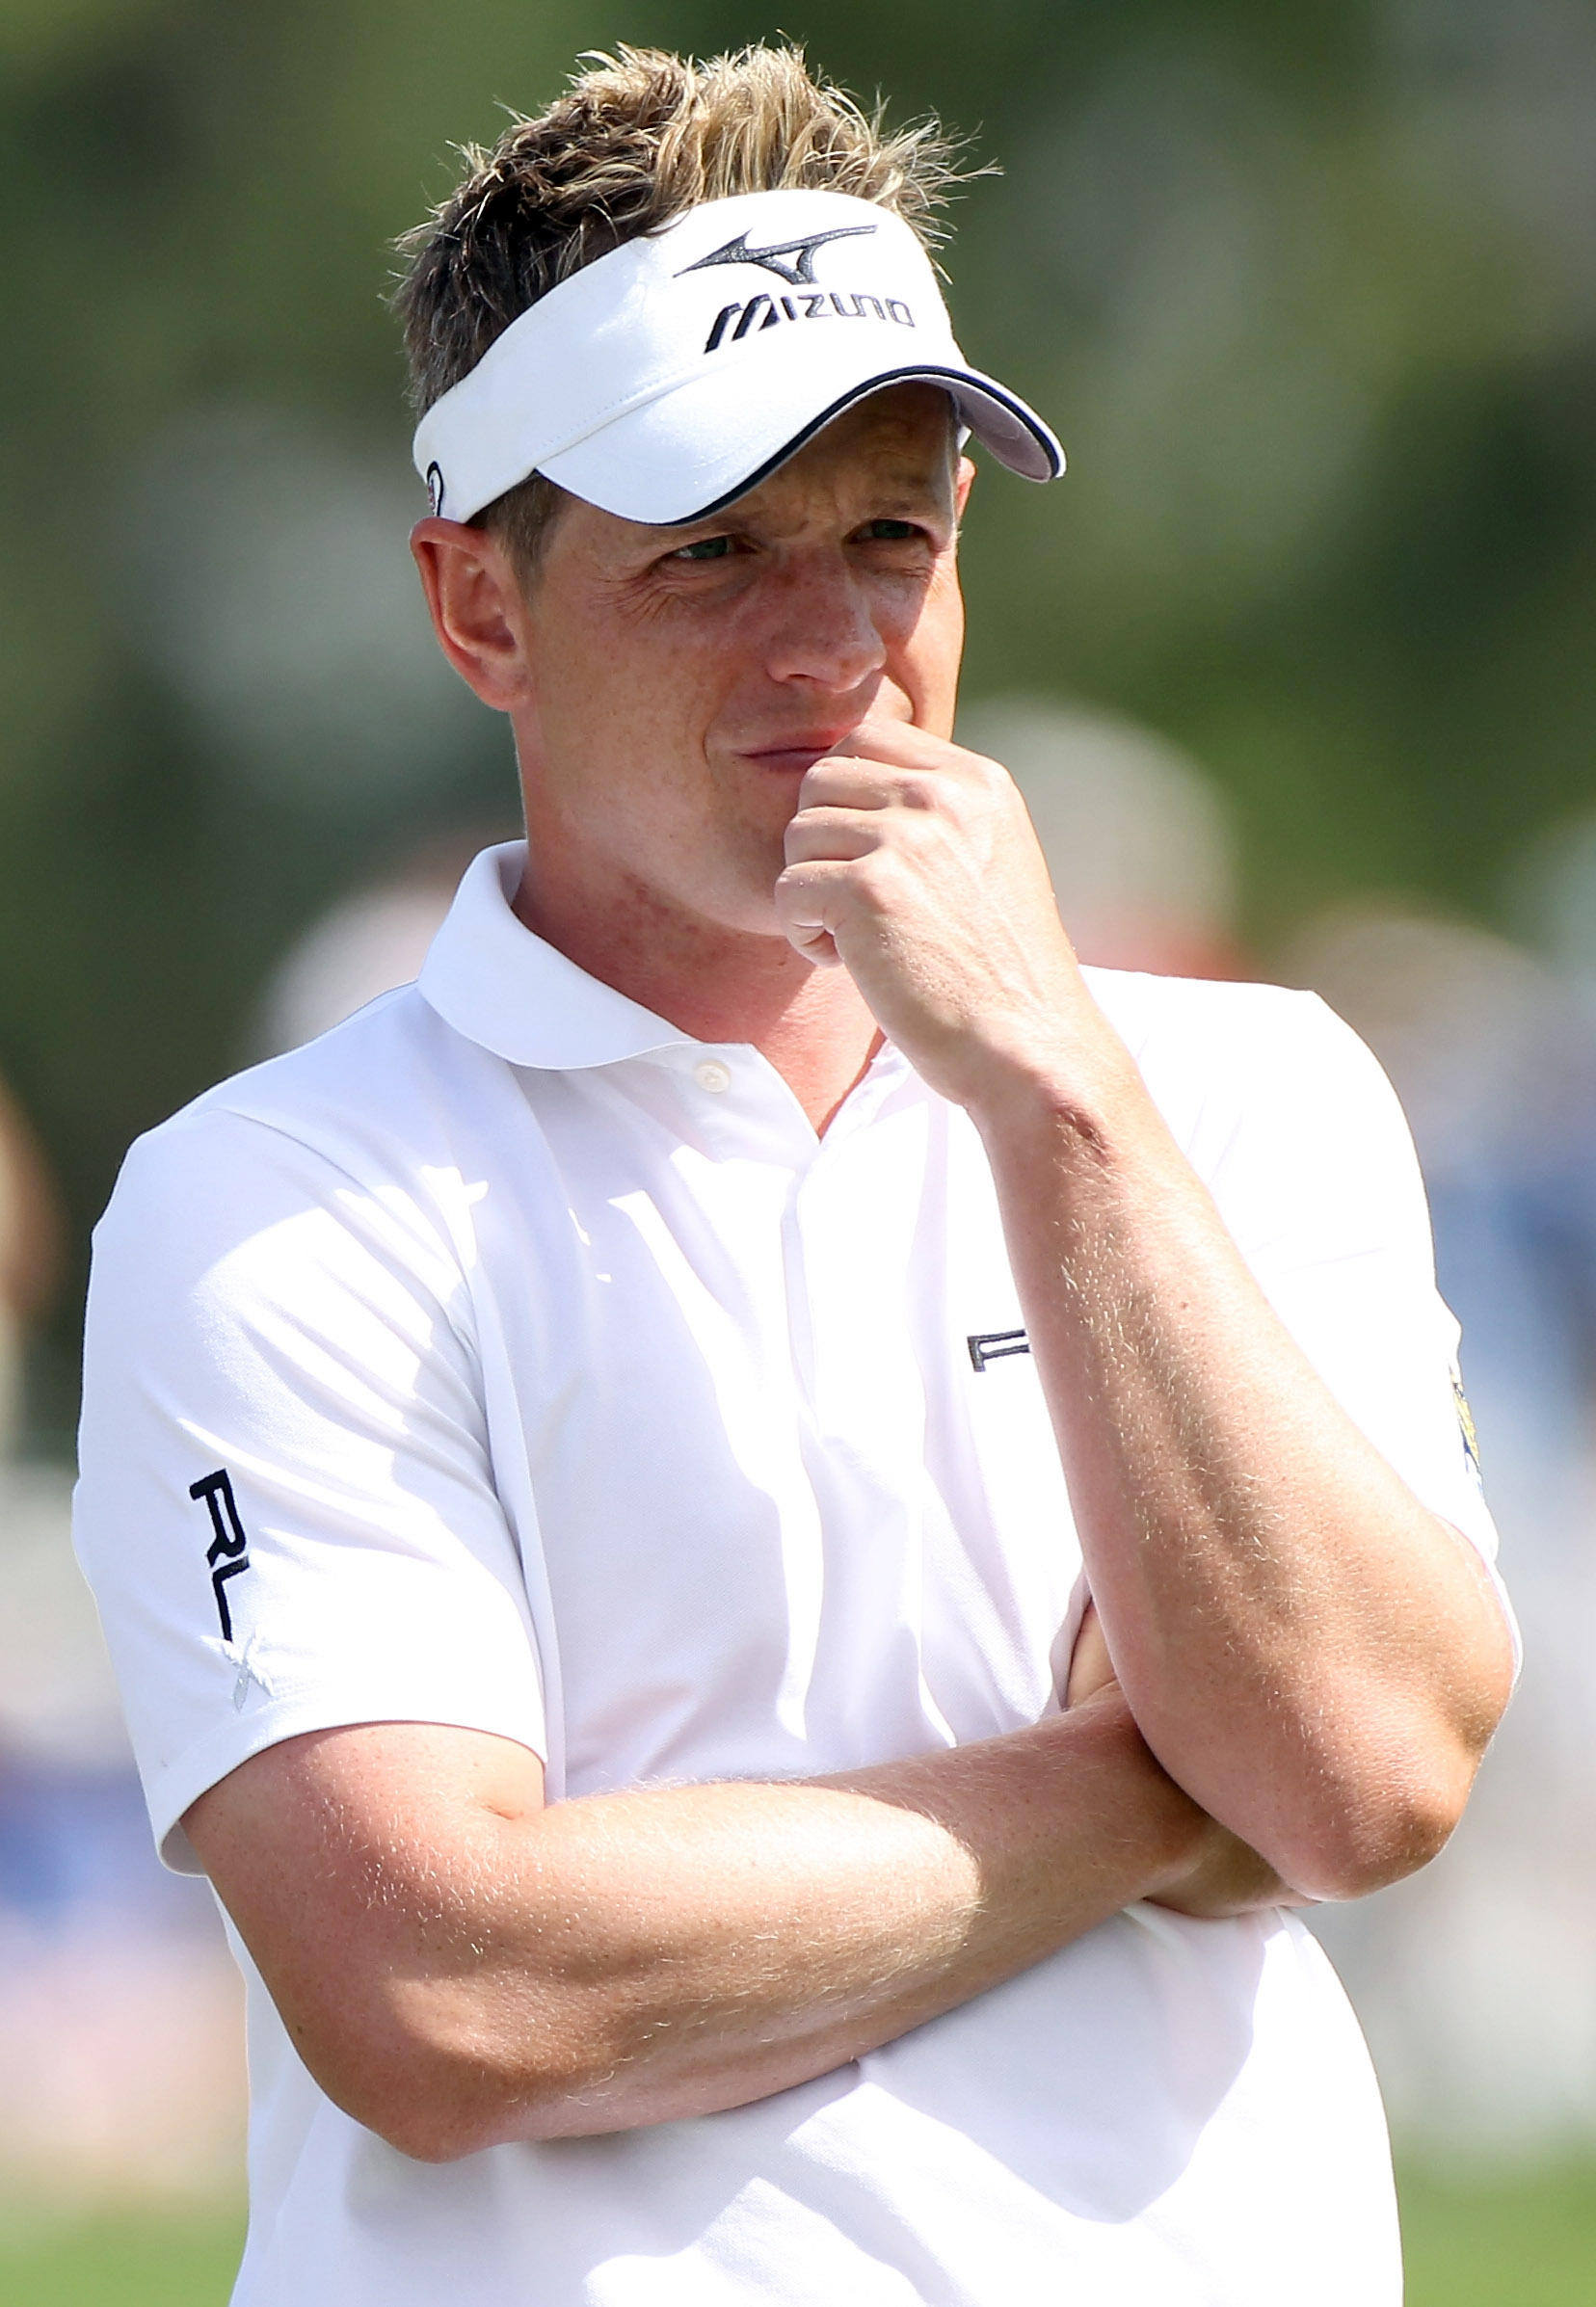 PALM BEACH GARDENS, FL - MARCH 04:  Luke Donald of England plays a shot on the 7th hole during the second round of The Honda Classic at PGA National Resort and Spa on March 4, 2011 in Palm Beach Gardens, Florida.  (Photo by Sam Greenwood/Getty Images)